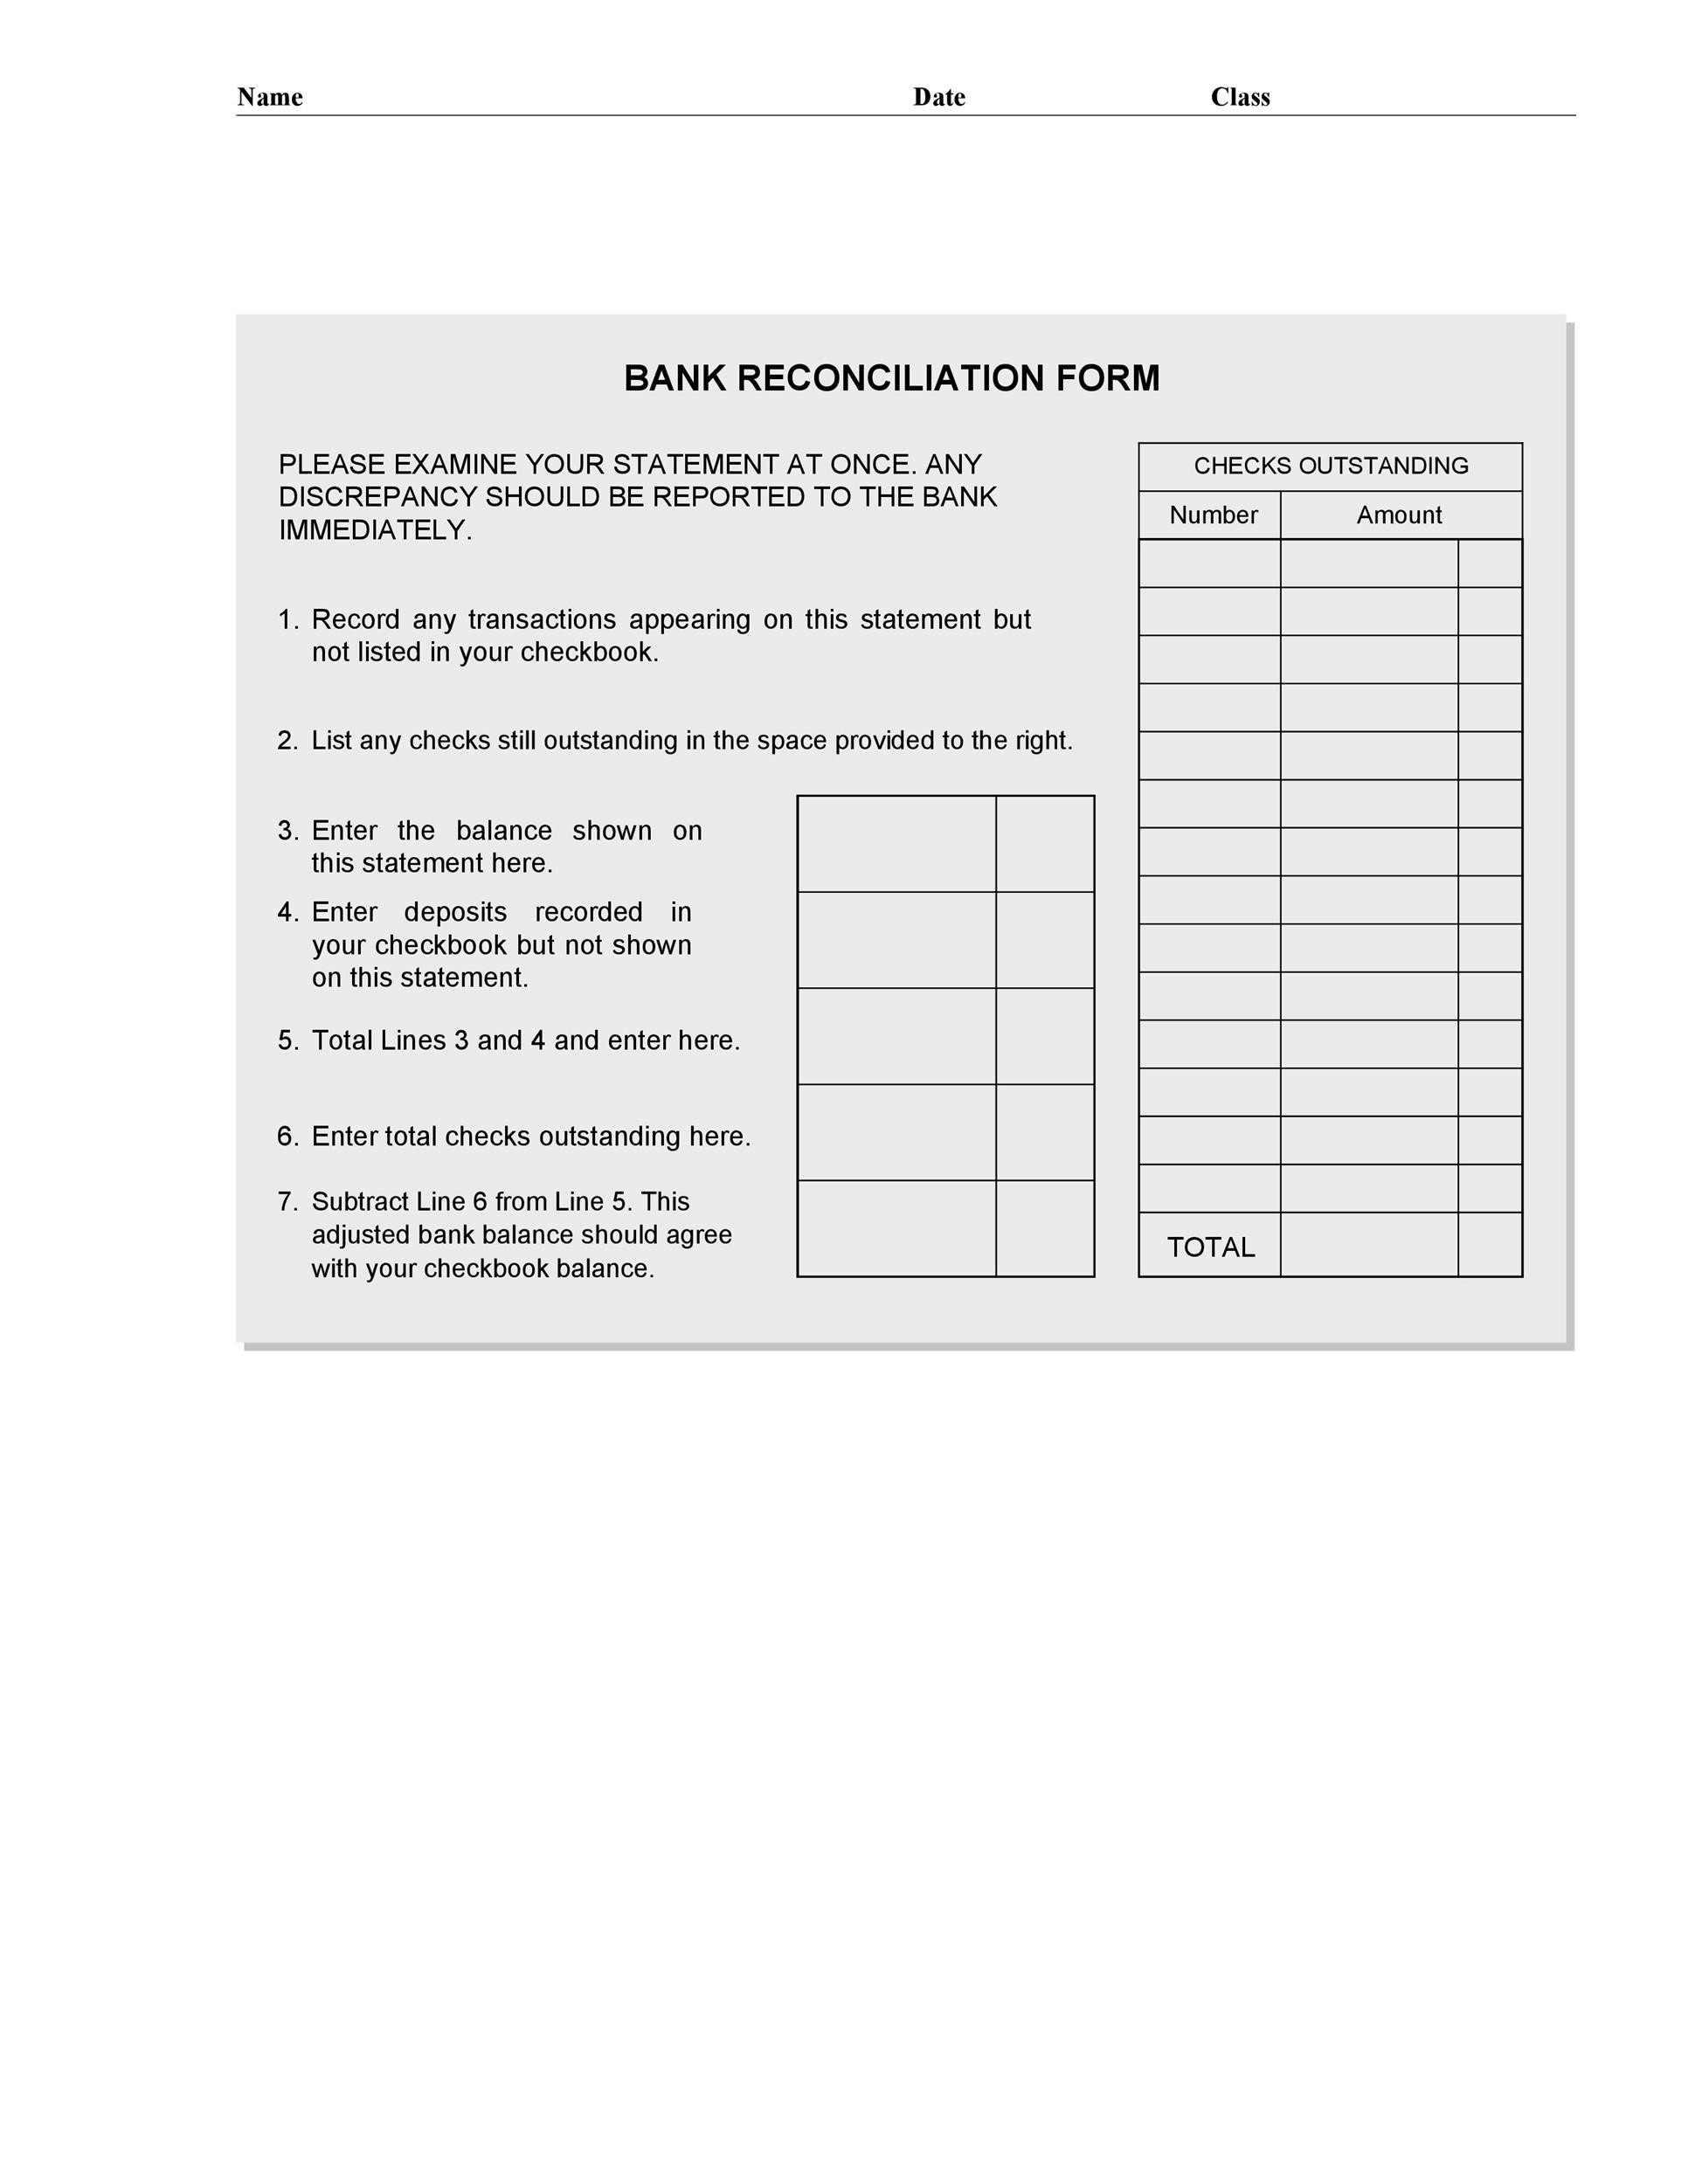 Reconciling A Bank Statement Worksheet 50 Bank Reconciliation Examples &amp; Templates [ Free]